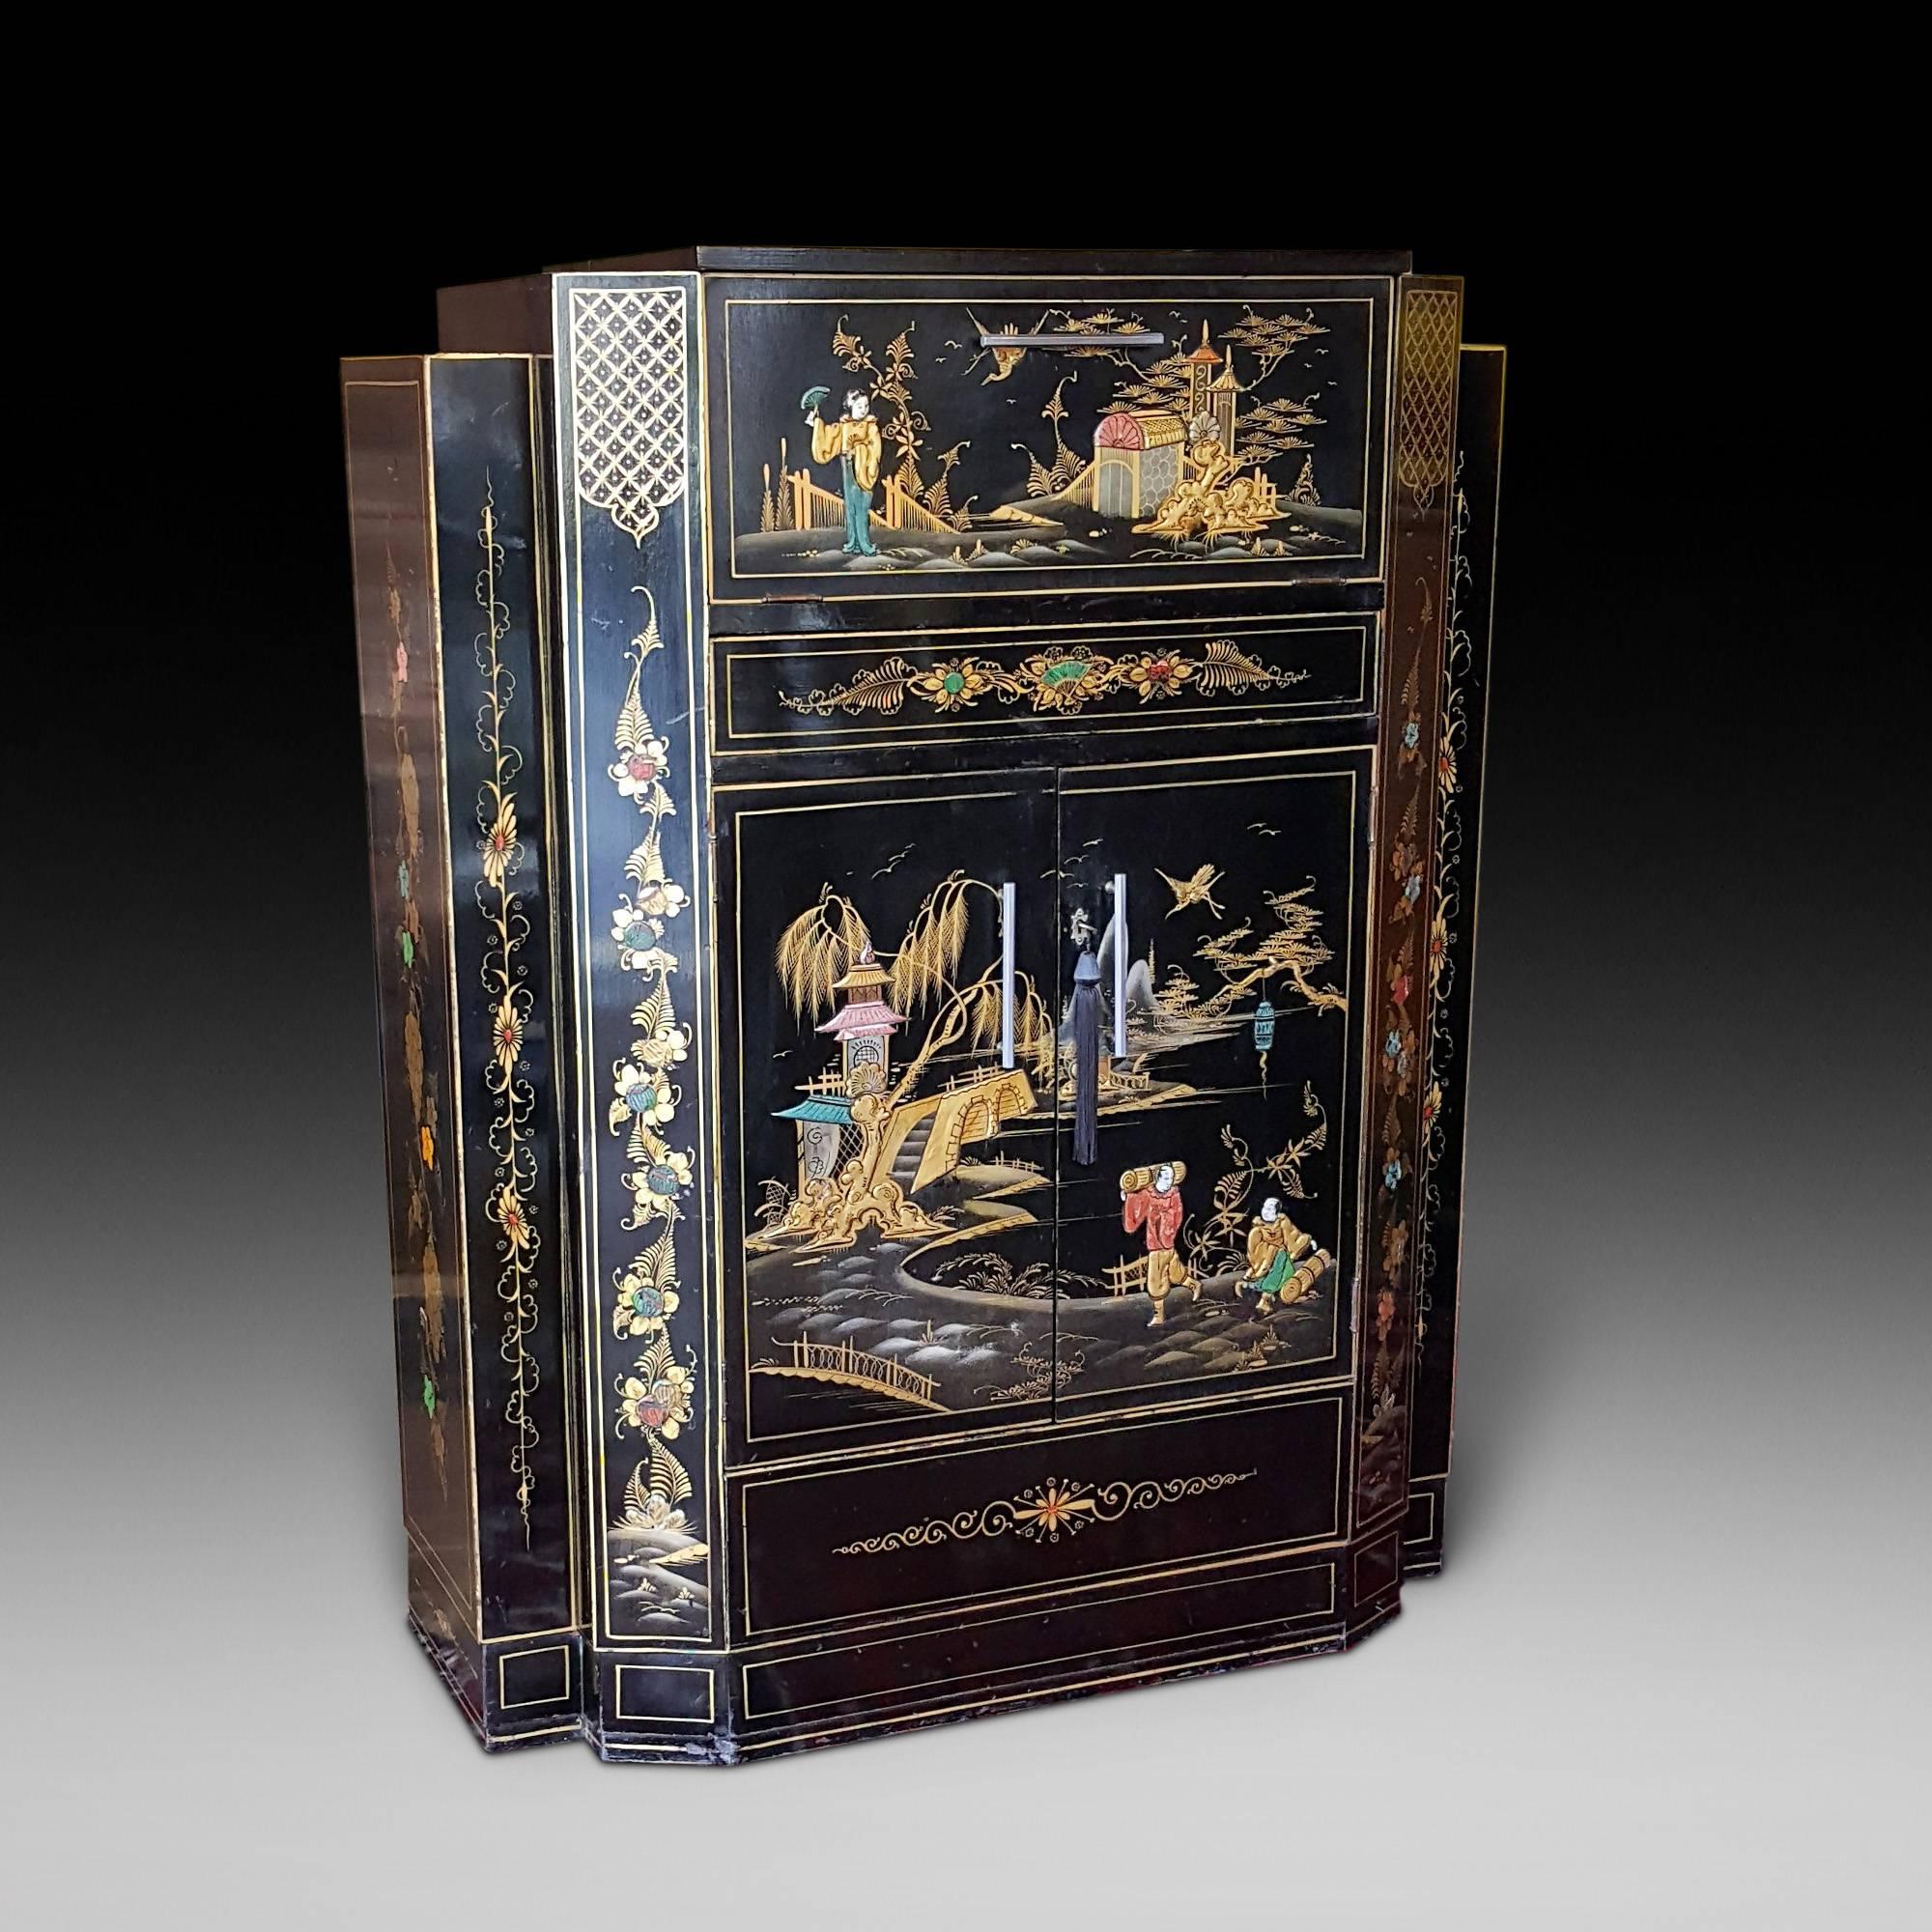 1920's Chinoiserie lacquered drinks cabinet with fitted cupboard, secret drawer and cocktail cabinet fitted with shaker, decanters, sticks, squeezer and cut glasses and tumblers - retailed by Gooch of Brompton Road, South Kensington, London - fully